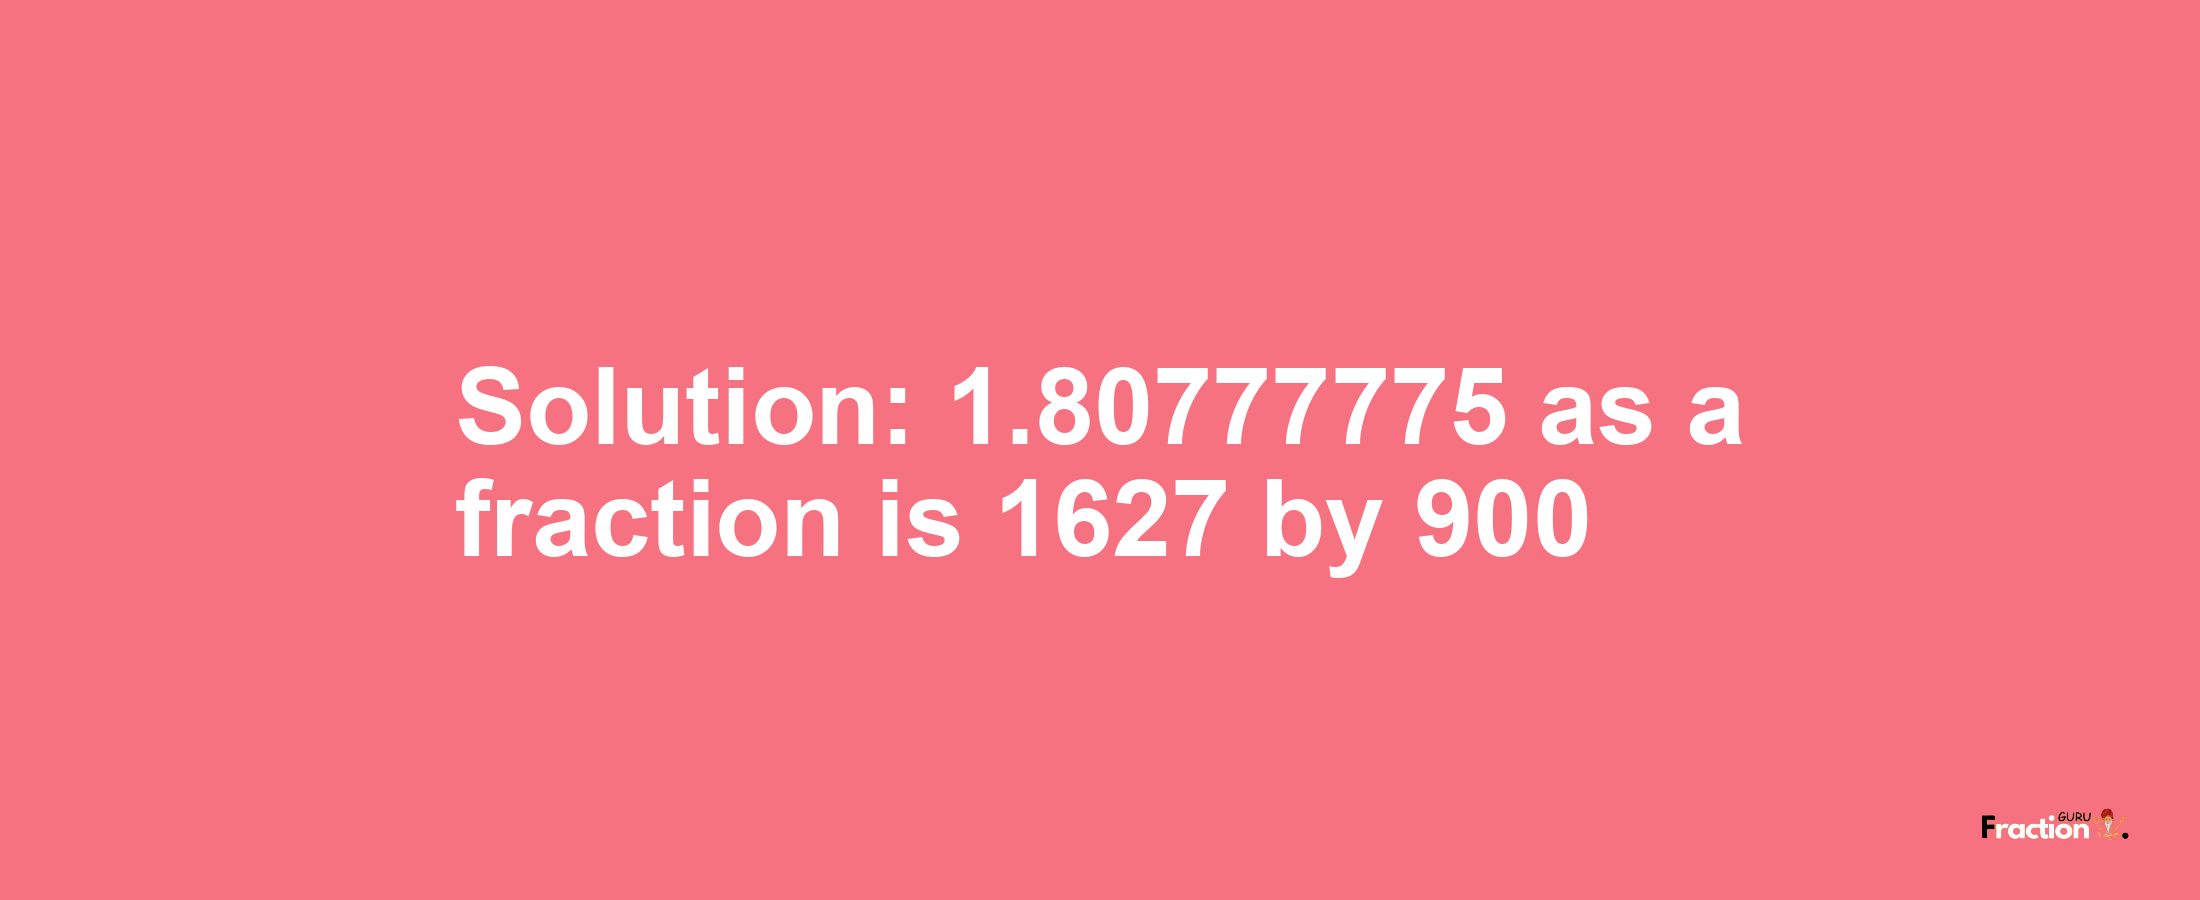 Solution:1.80777775 as a fraction is 1627/900